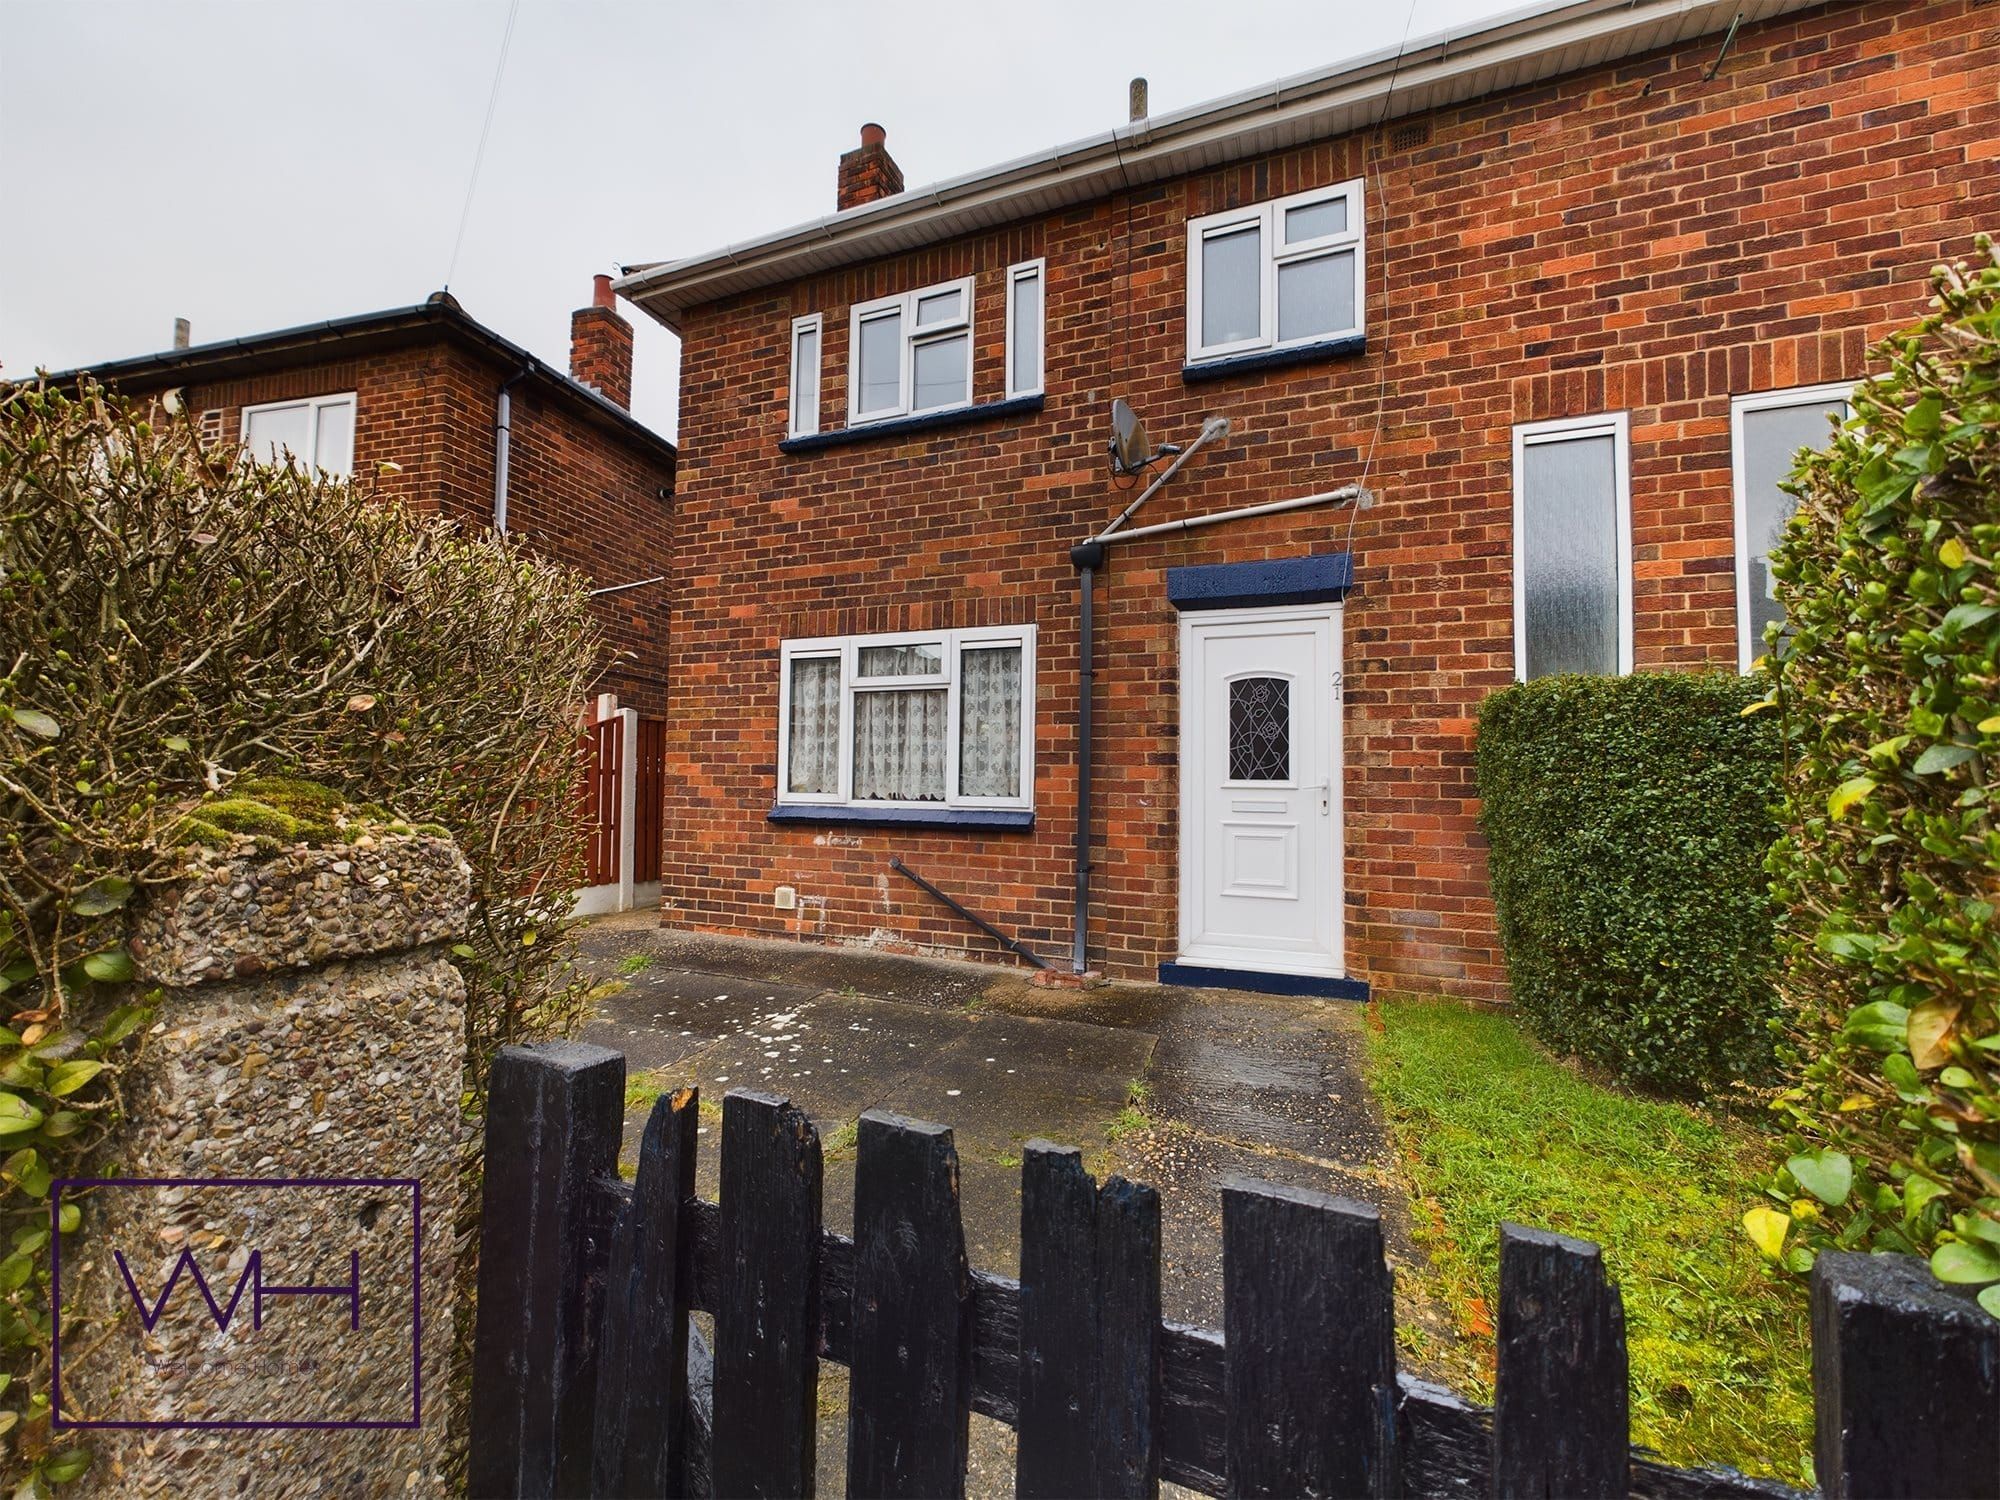 Amersall Crescent , Scawthorpe , Doncaster, DN5 9HS